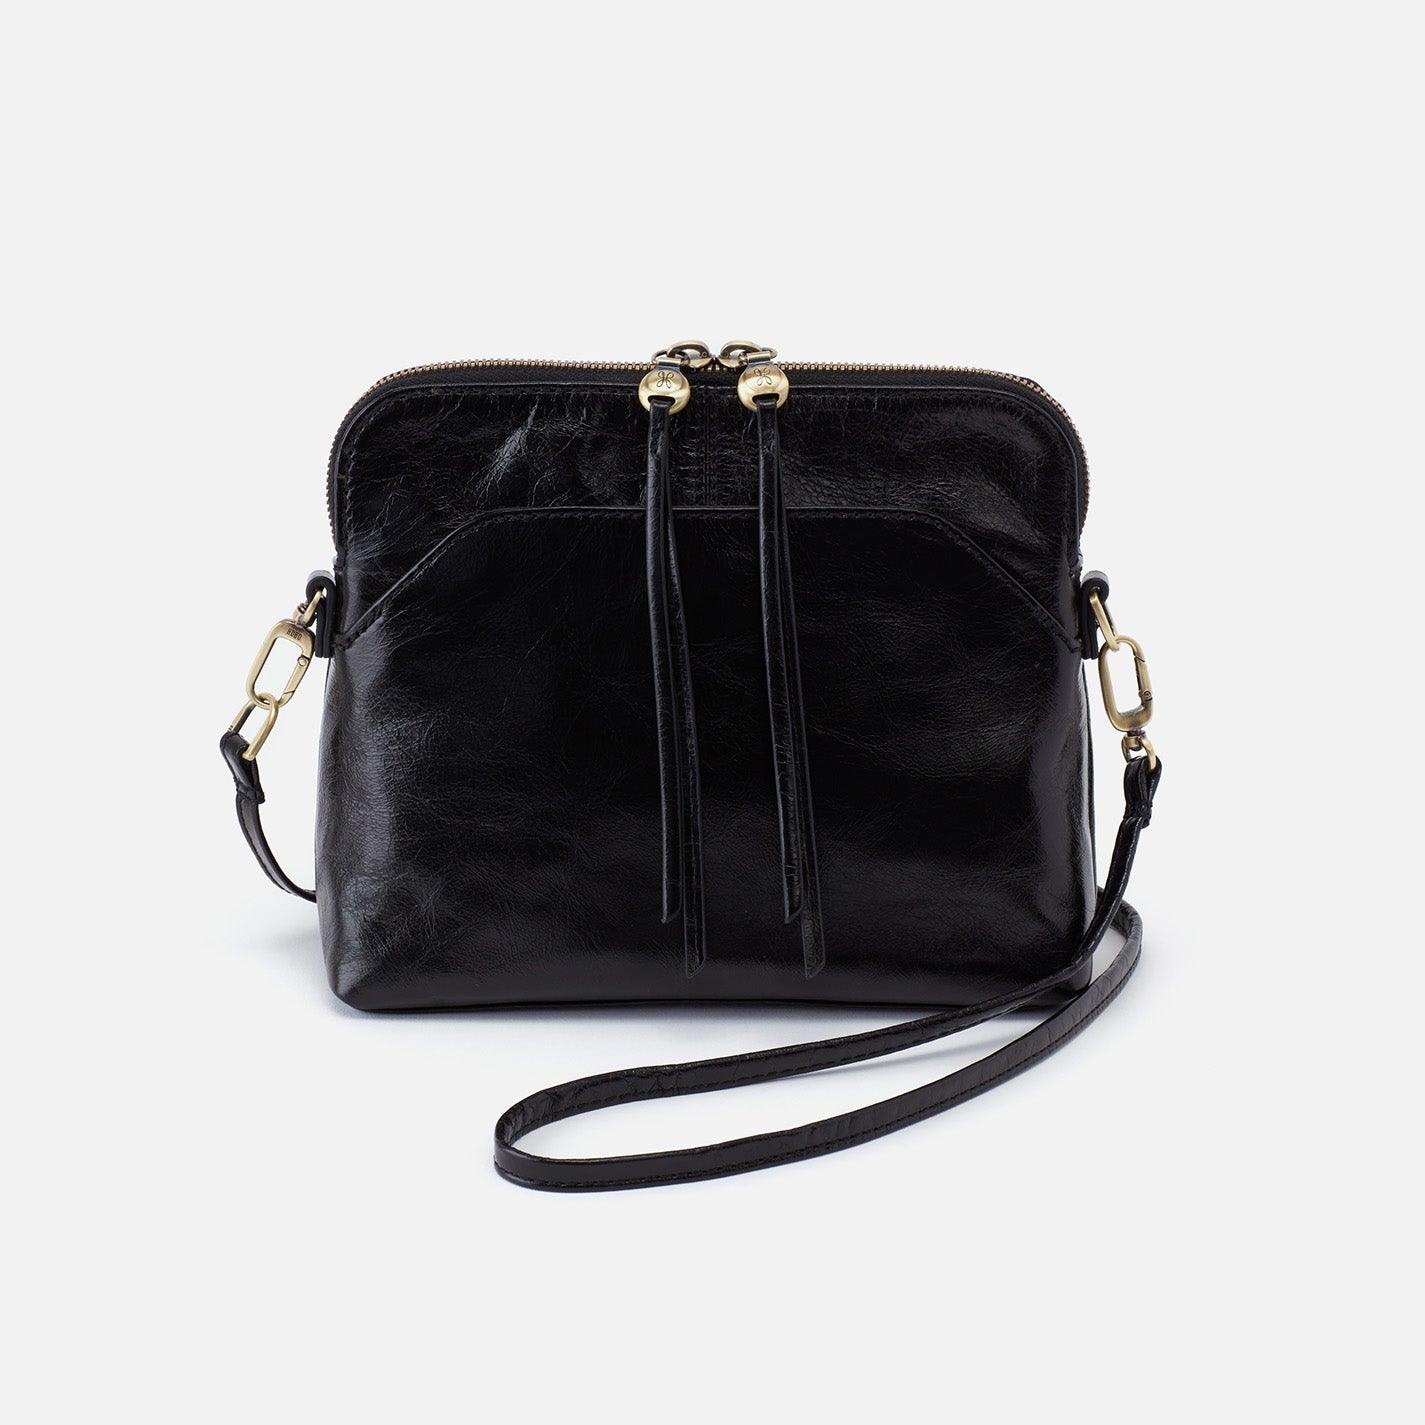 Hobo Handbags.  Crafted in a hand-selected, full-grain Italian leather and finished with a high-gloss shine.